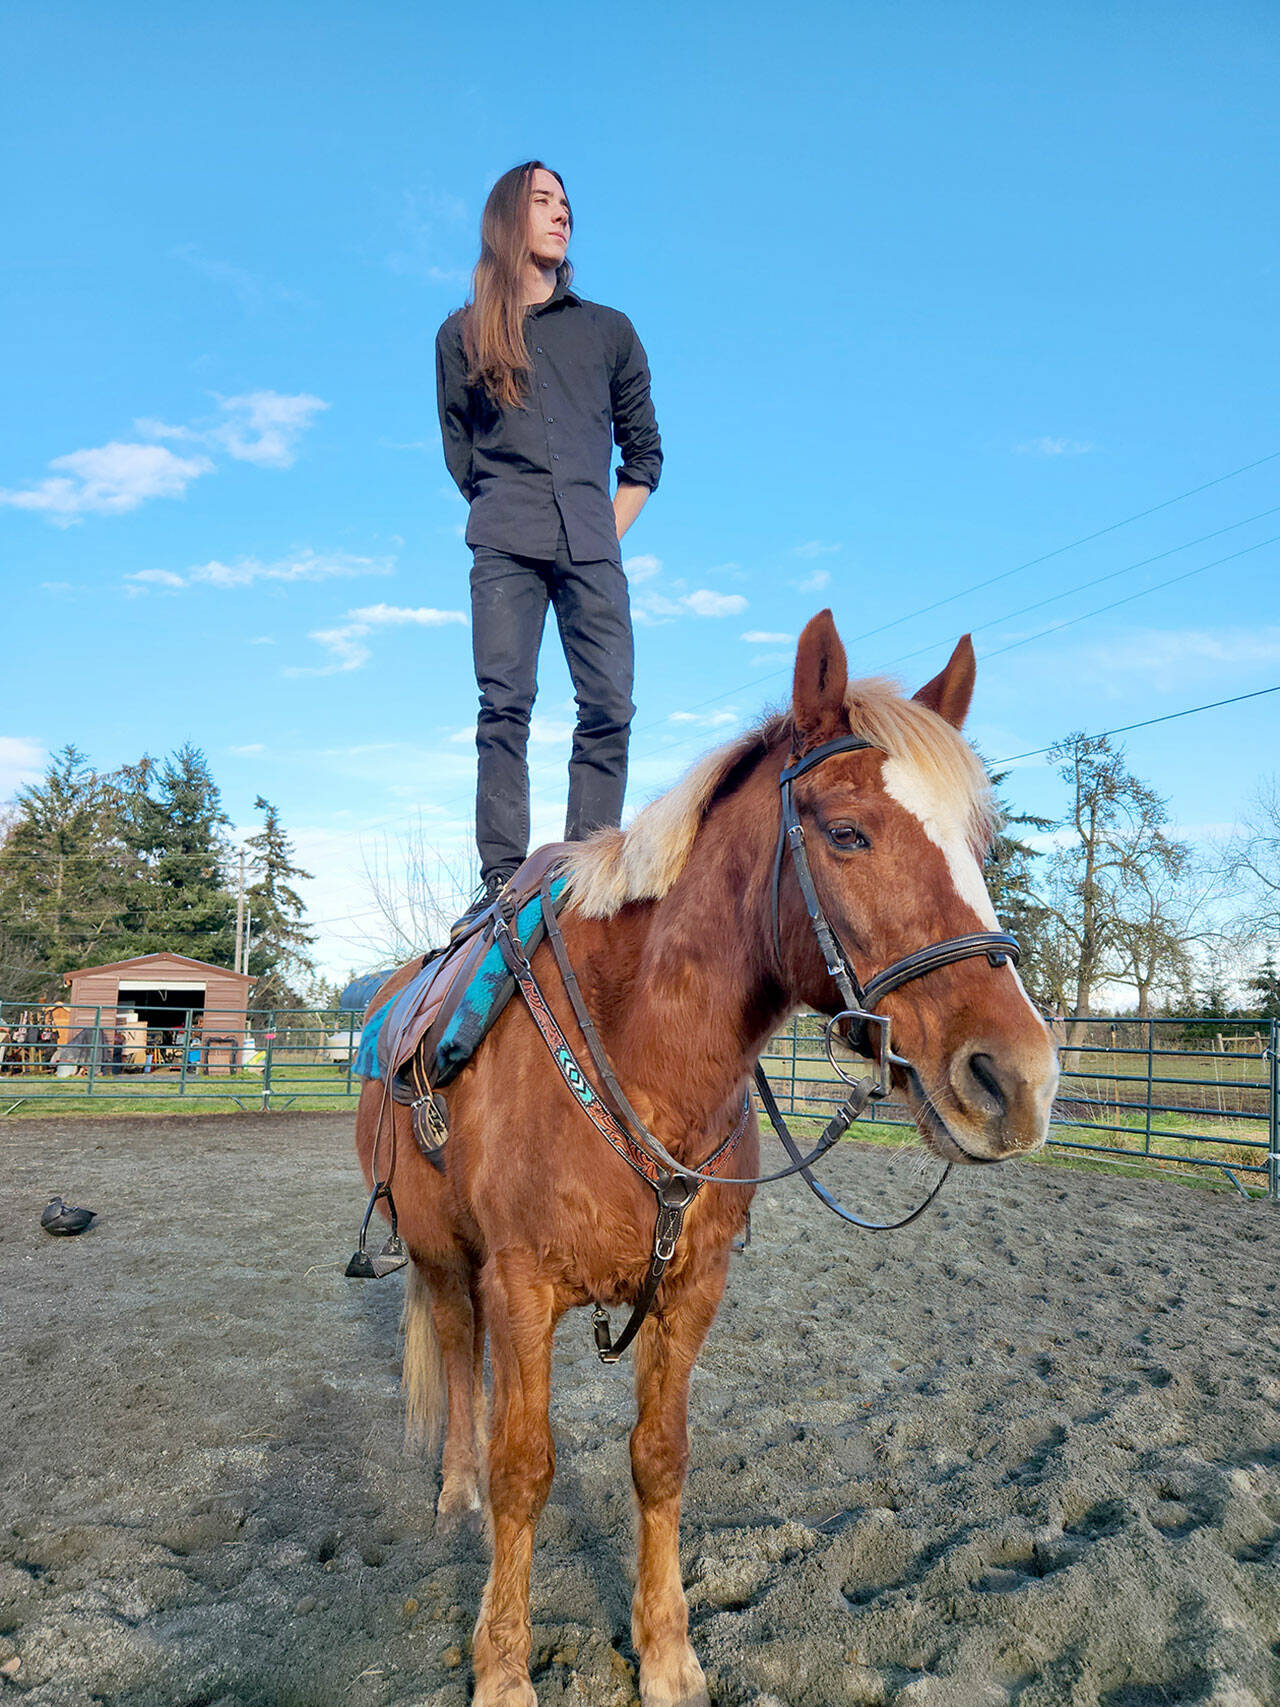 Casper Royall, 17, grandson of an OPEN founder and son of its horse trainer, has enjoyed employing vault training (a type of gymnastics on horseback) with Rupert, a Haflinger horse, who will soon be up for adoption by OPEN.